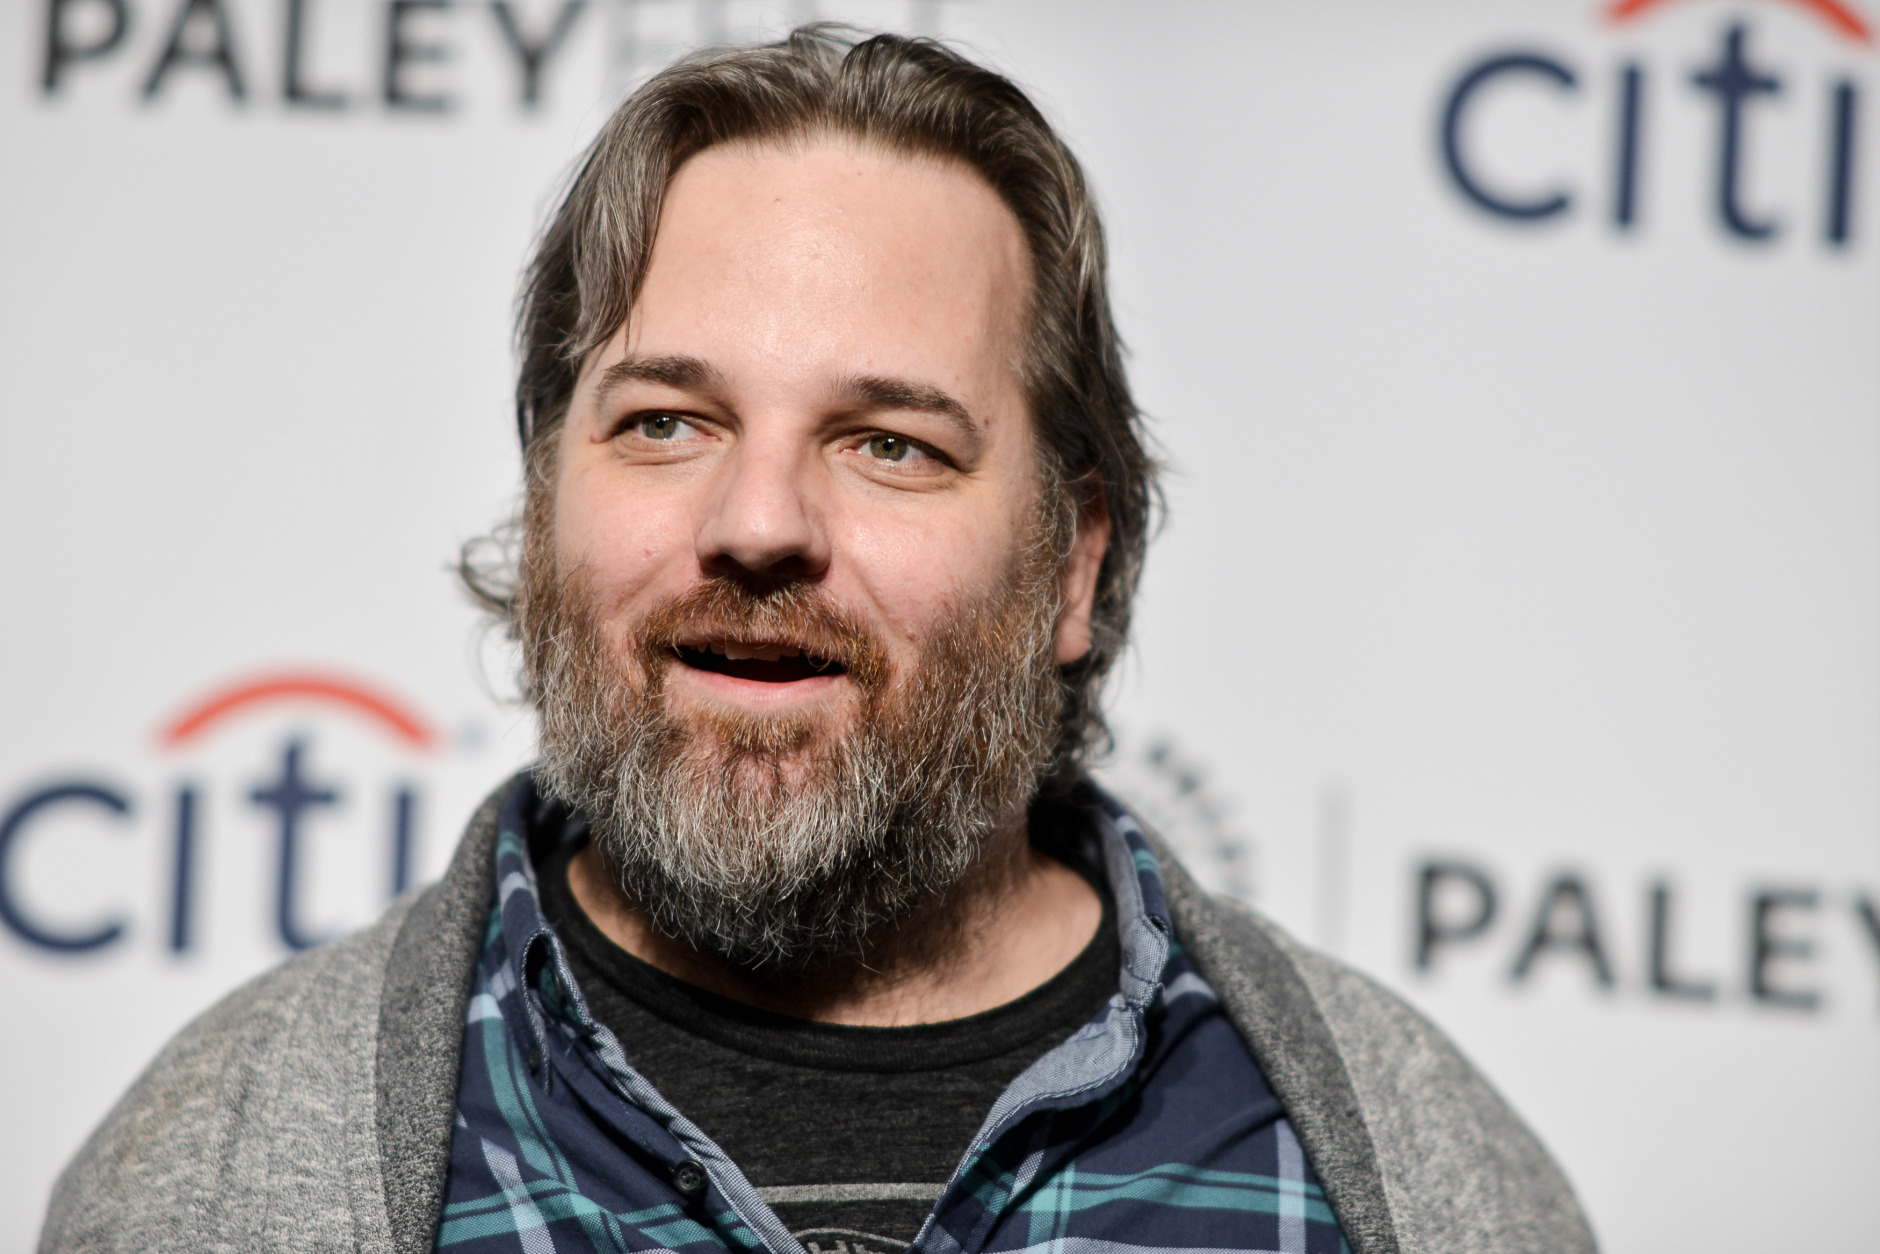 FILE - In March 26, 2014 file photo, Dan Harmon arrives at PALEYFEST 2014 - "Community" in Los Angeles. The axed NBC sitcom "Community" will make its Yahoo debut in March. Yahoo announced Tuesday, Jan. 13, 2015, that sitcom will begin its online life with a pair of episodes.  (Photo by Richard Shotwell/Invision/AP, File)